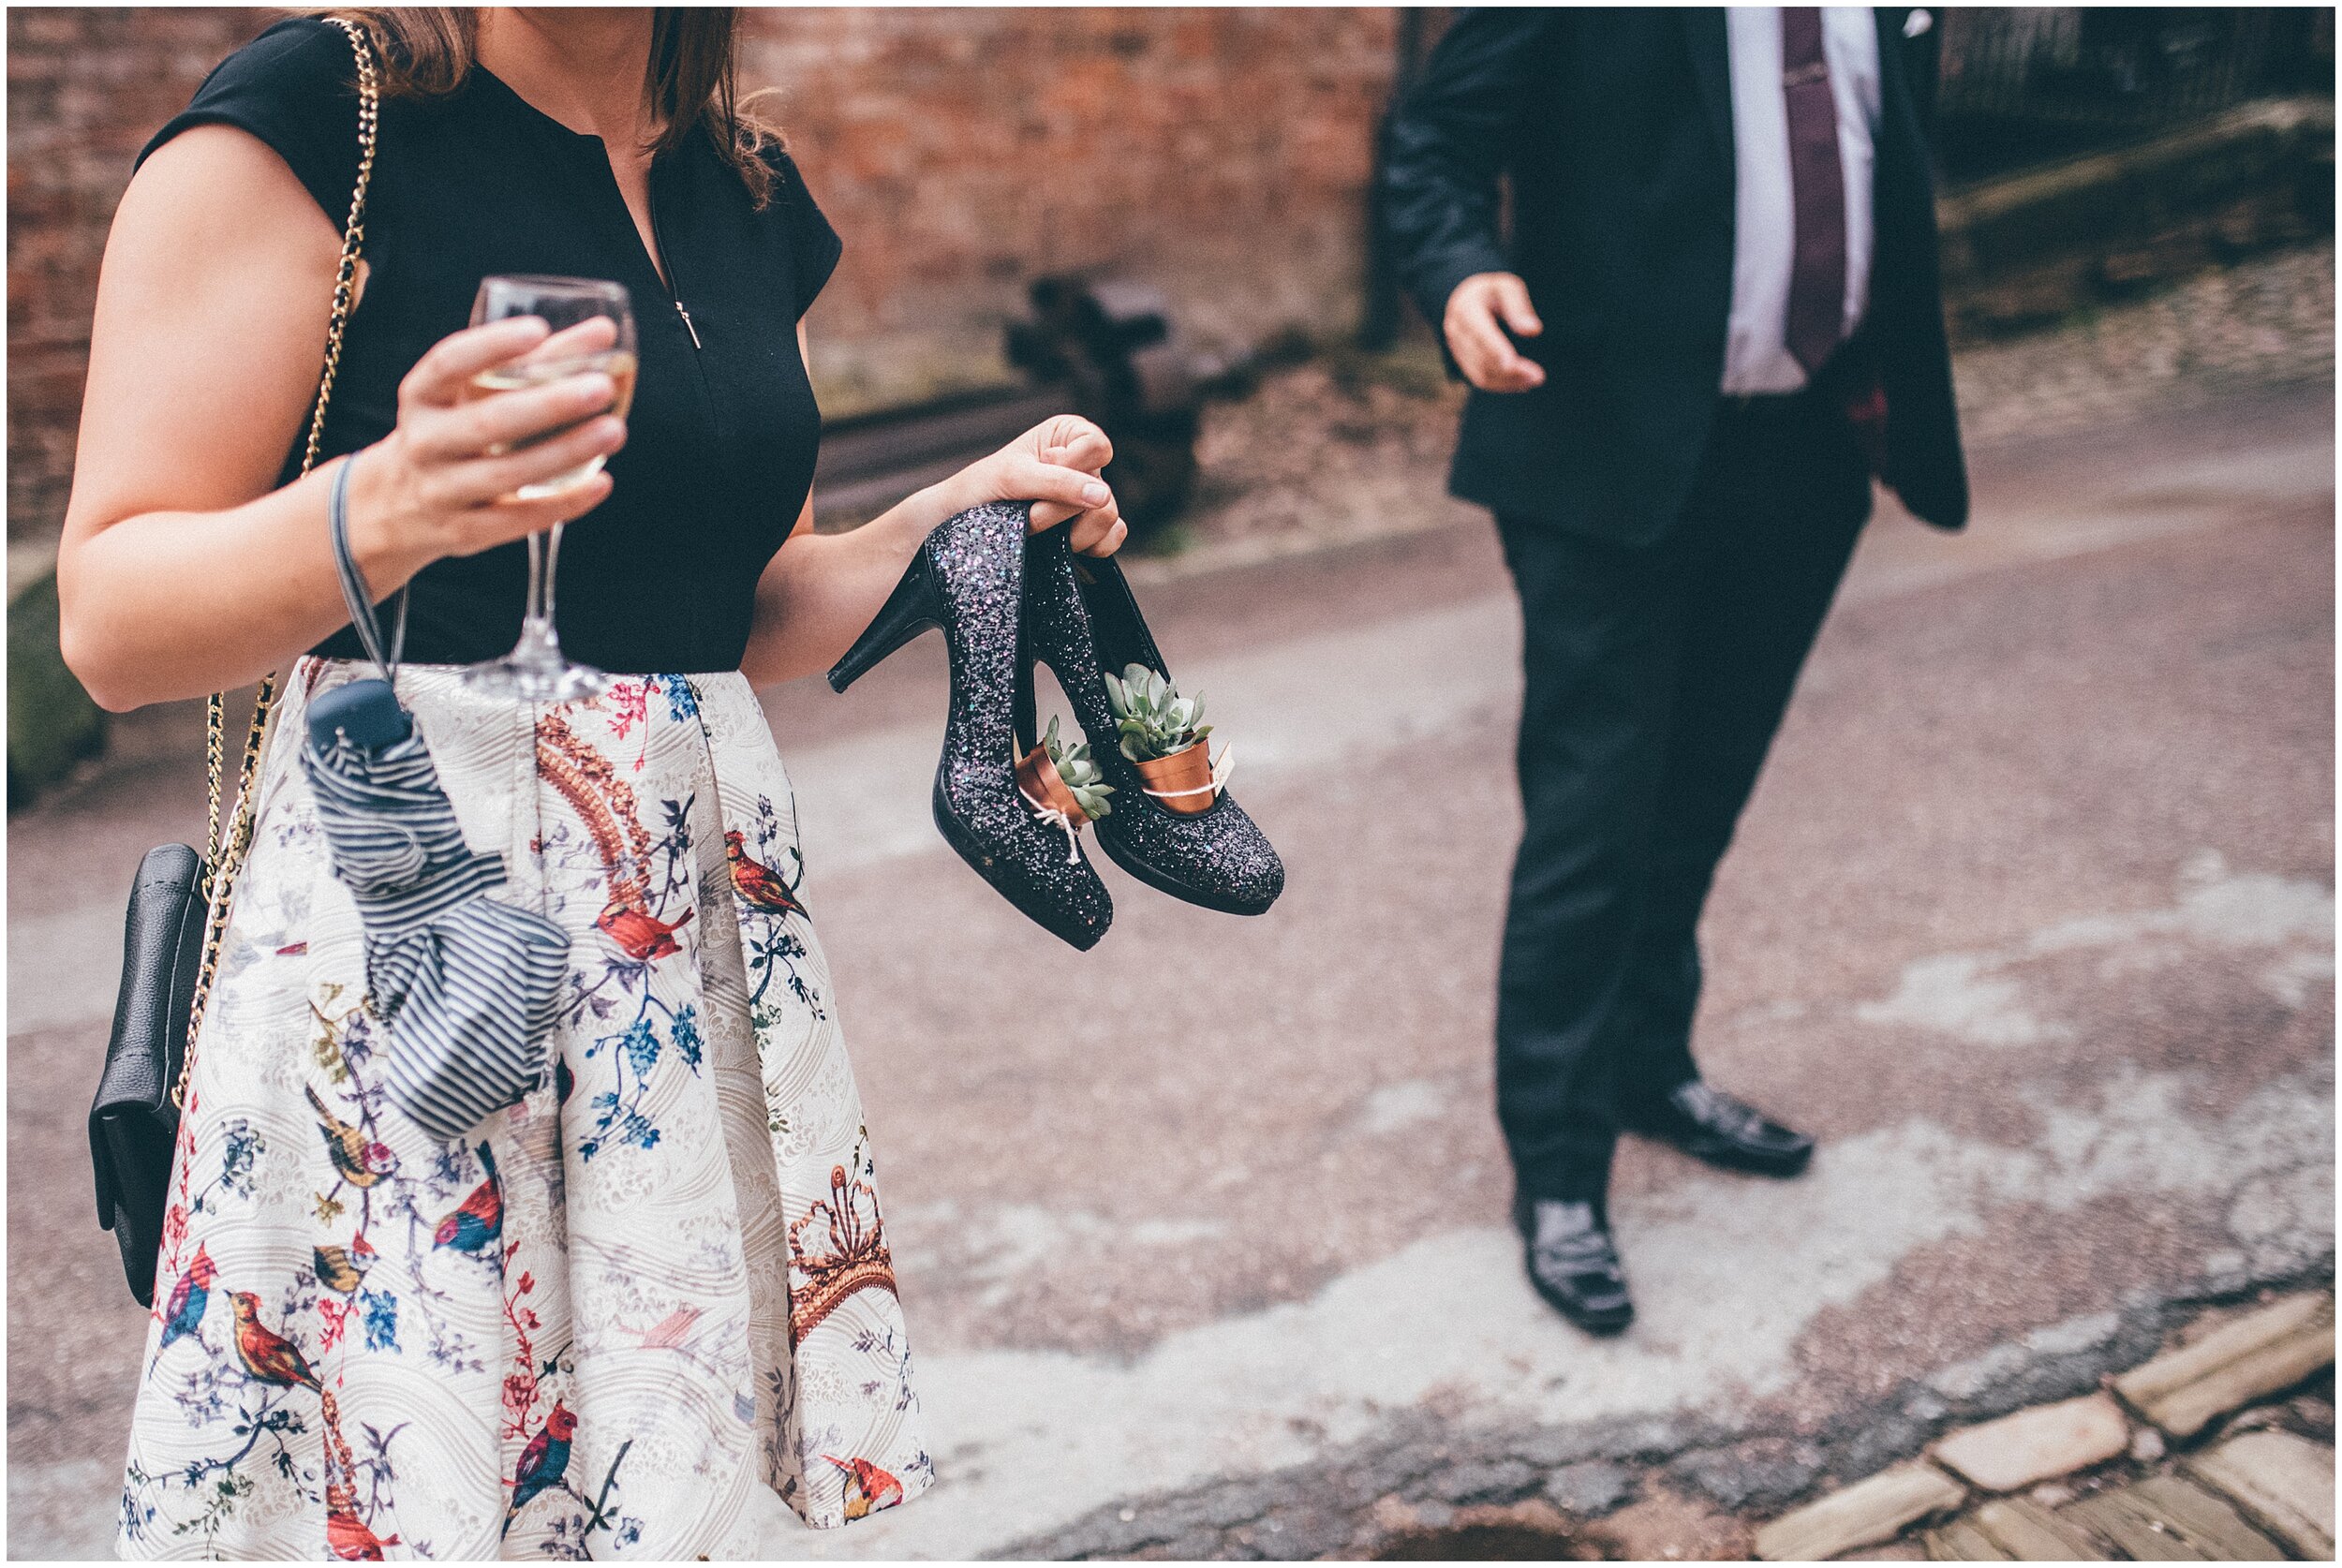 Wedding guests walks around with her shoes off New husband and wife at Quarry Bank Mill wedding in Cheshire near to Manchester.